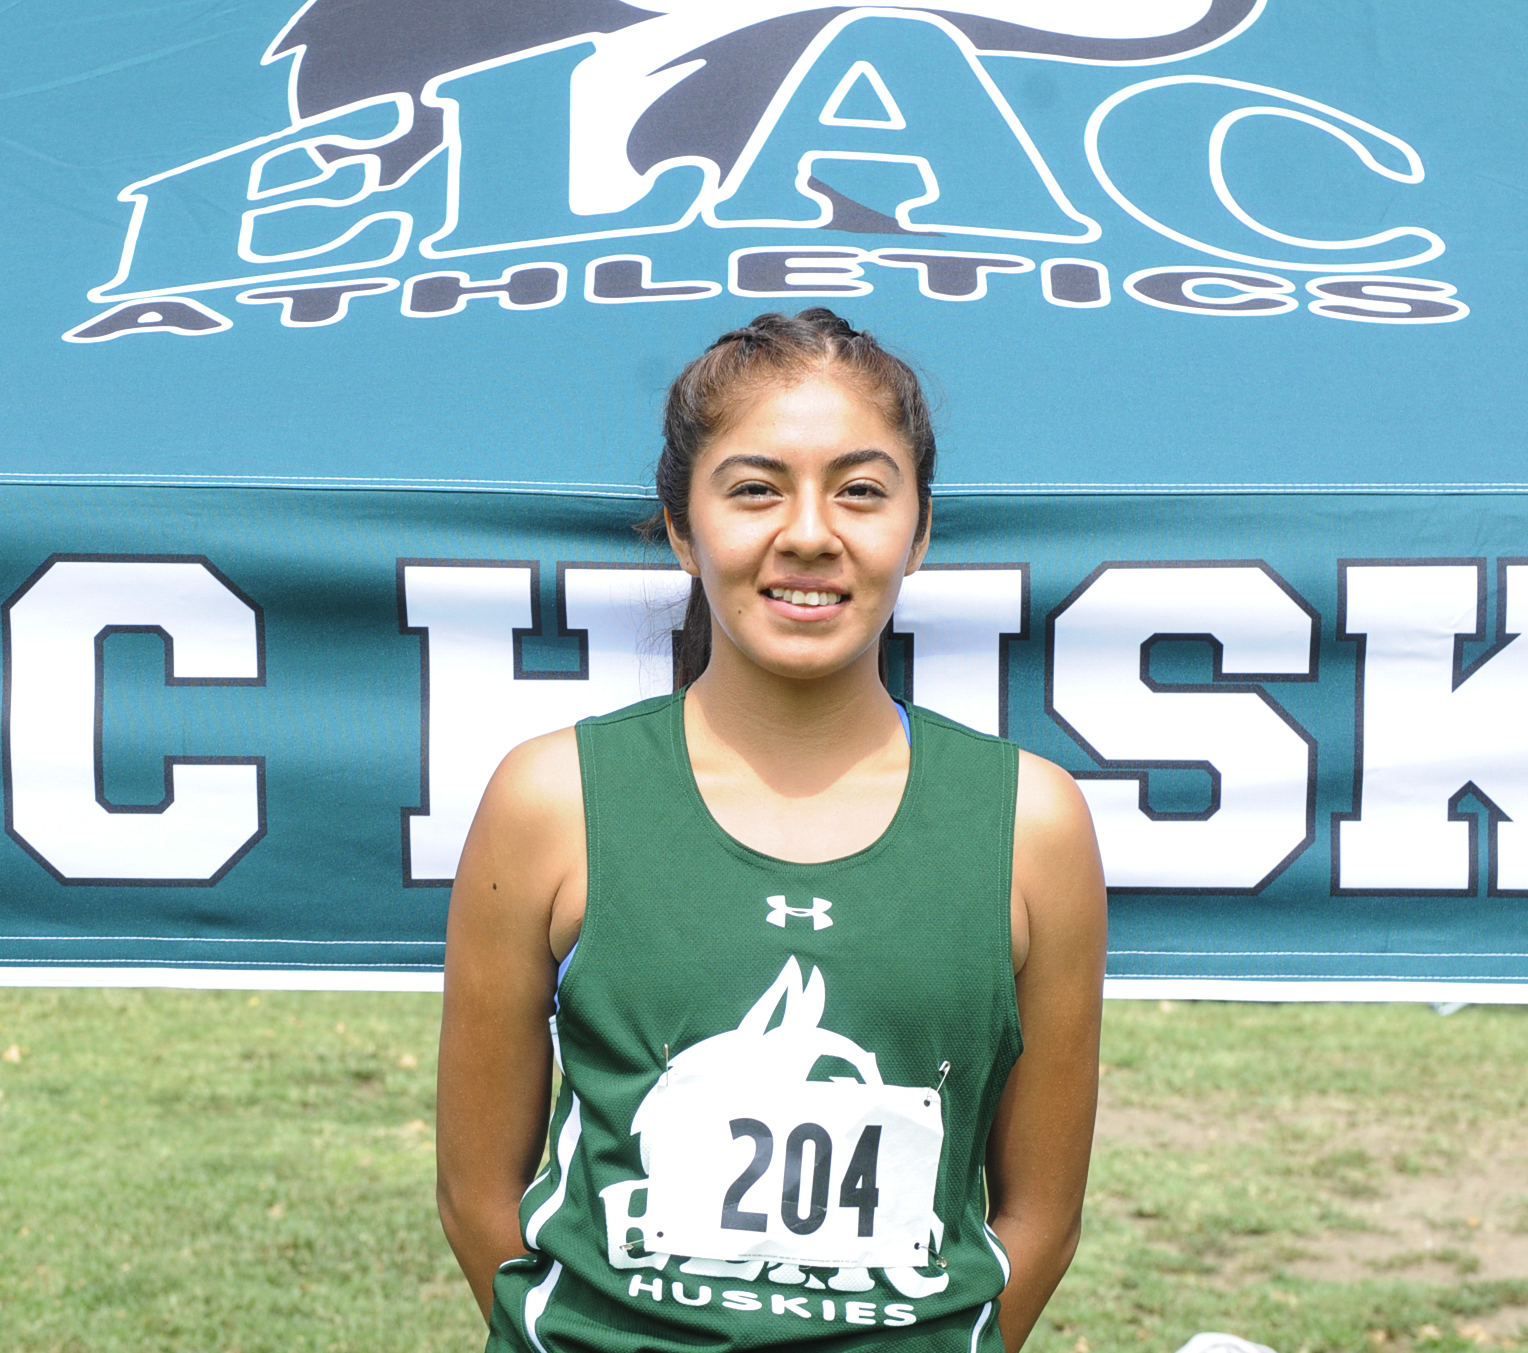 Freshman Alejandra Martinez competed in two events in the Soka Indoor qualifier in the Soka University Track complex on February 10, 2018, ELAC's first indoor track meet in more than 25 years. (Photo by Tadzio Garcia)